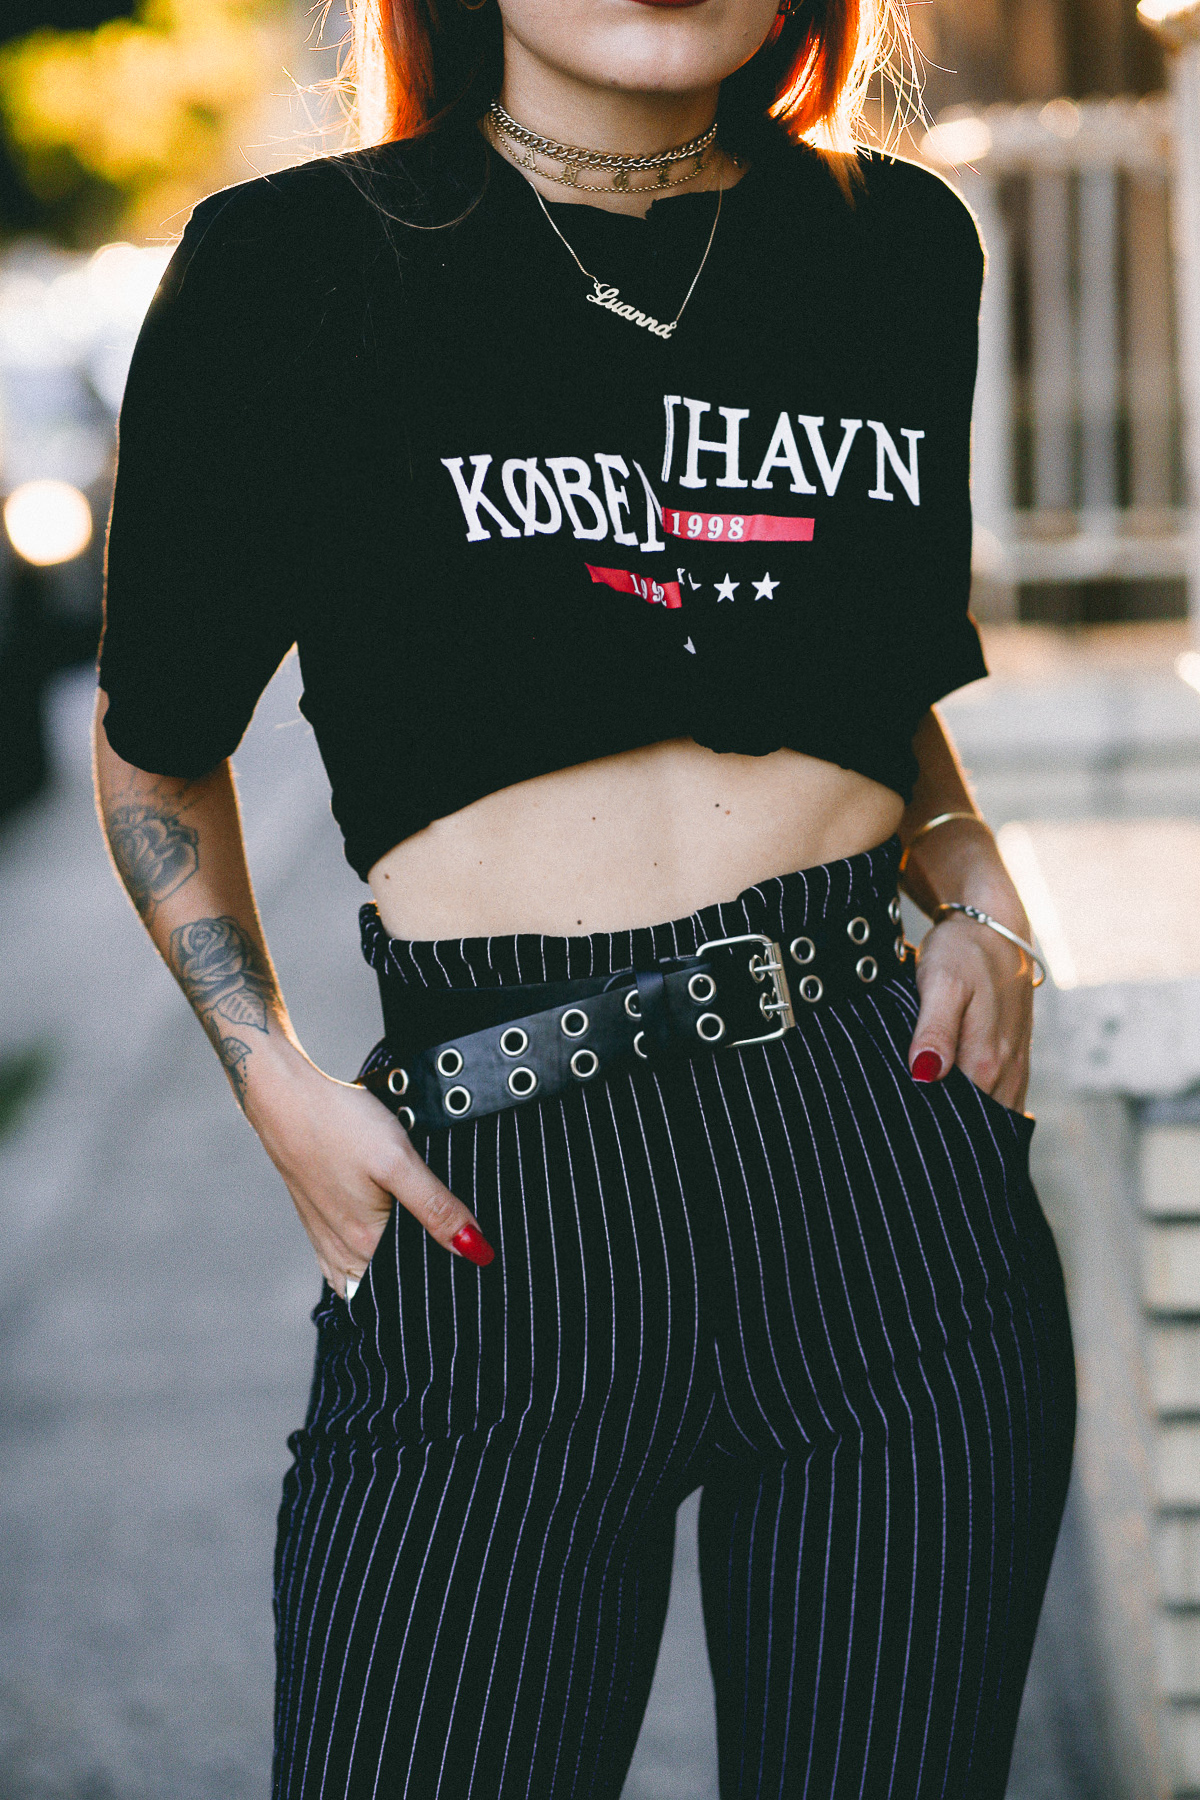 Pinstripe pants paired with double hook belt and a graphic black and red t-shirt